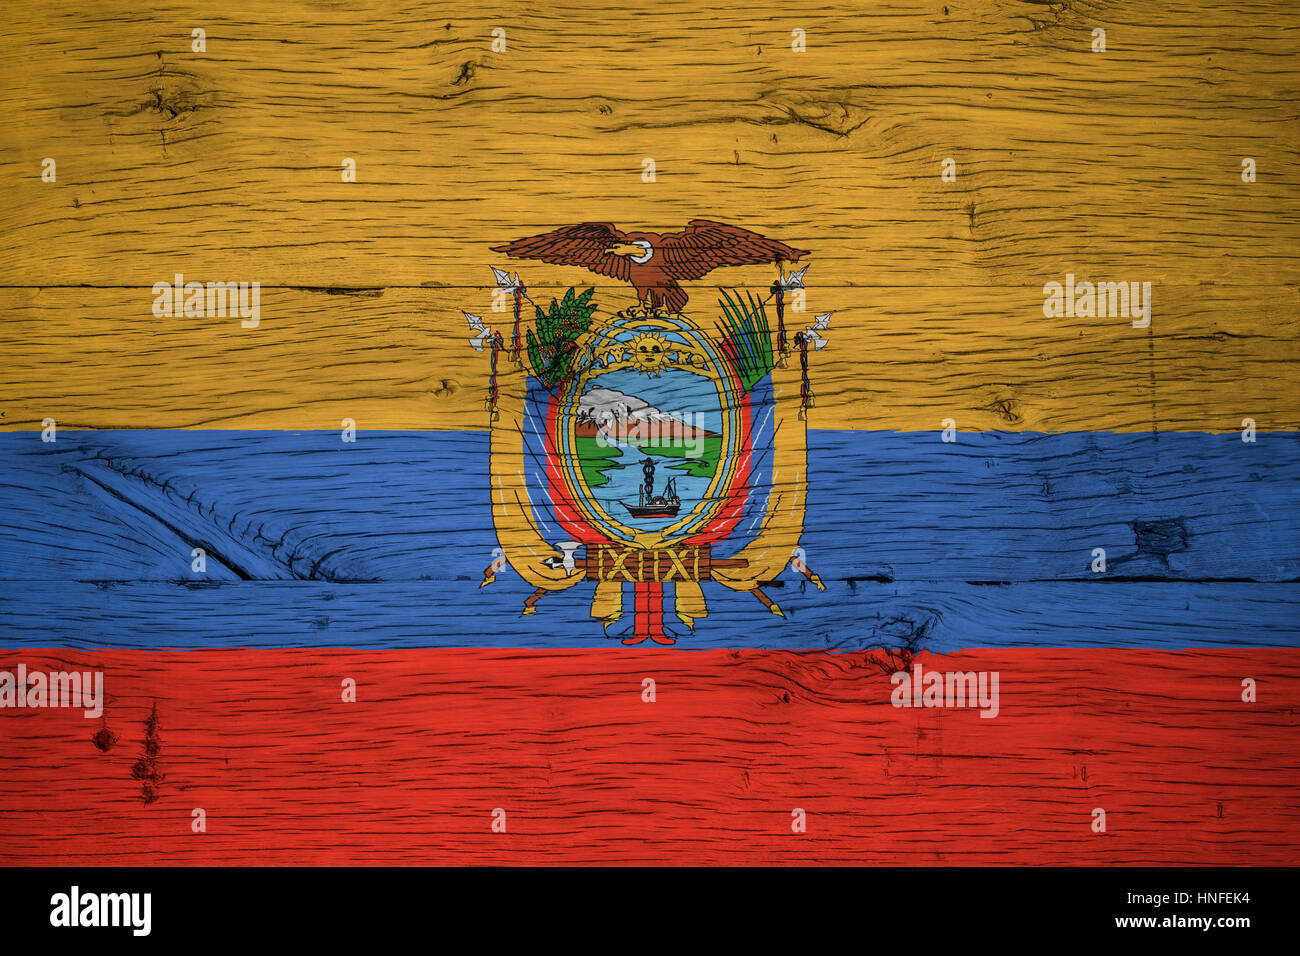 Ecuador national flag painted on old oak wood. Painting is colorful on planks of old train carriage. Stock Photo